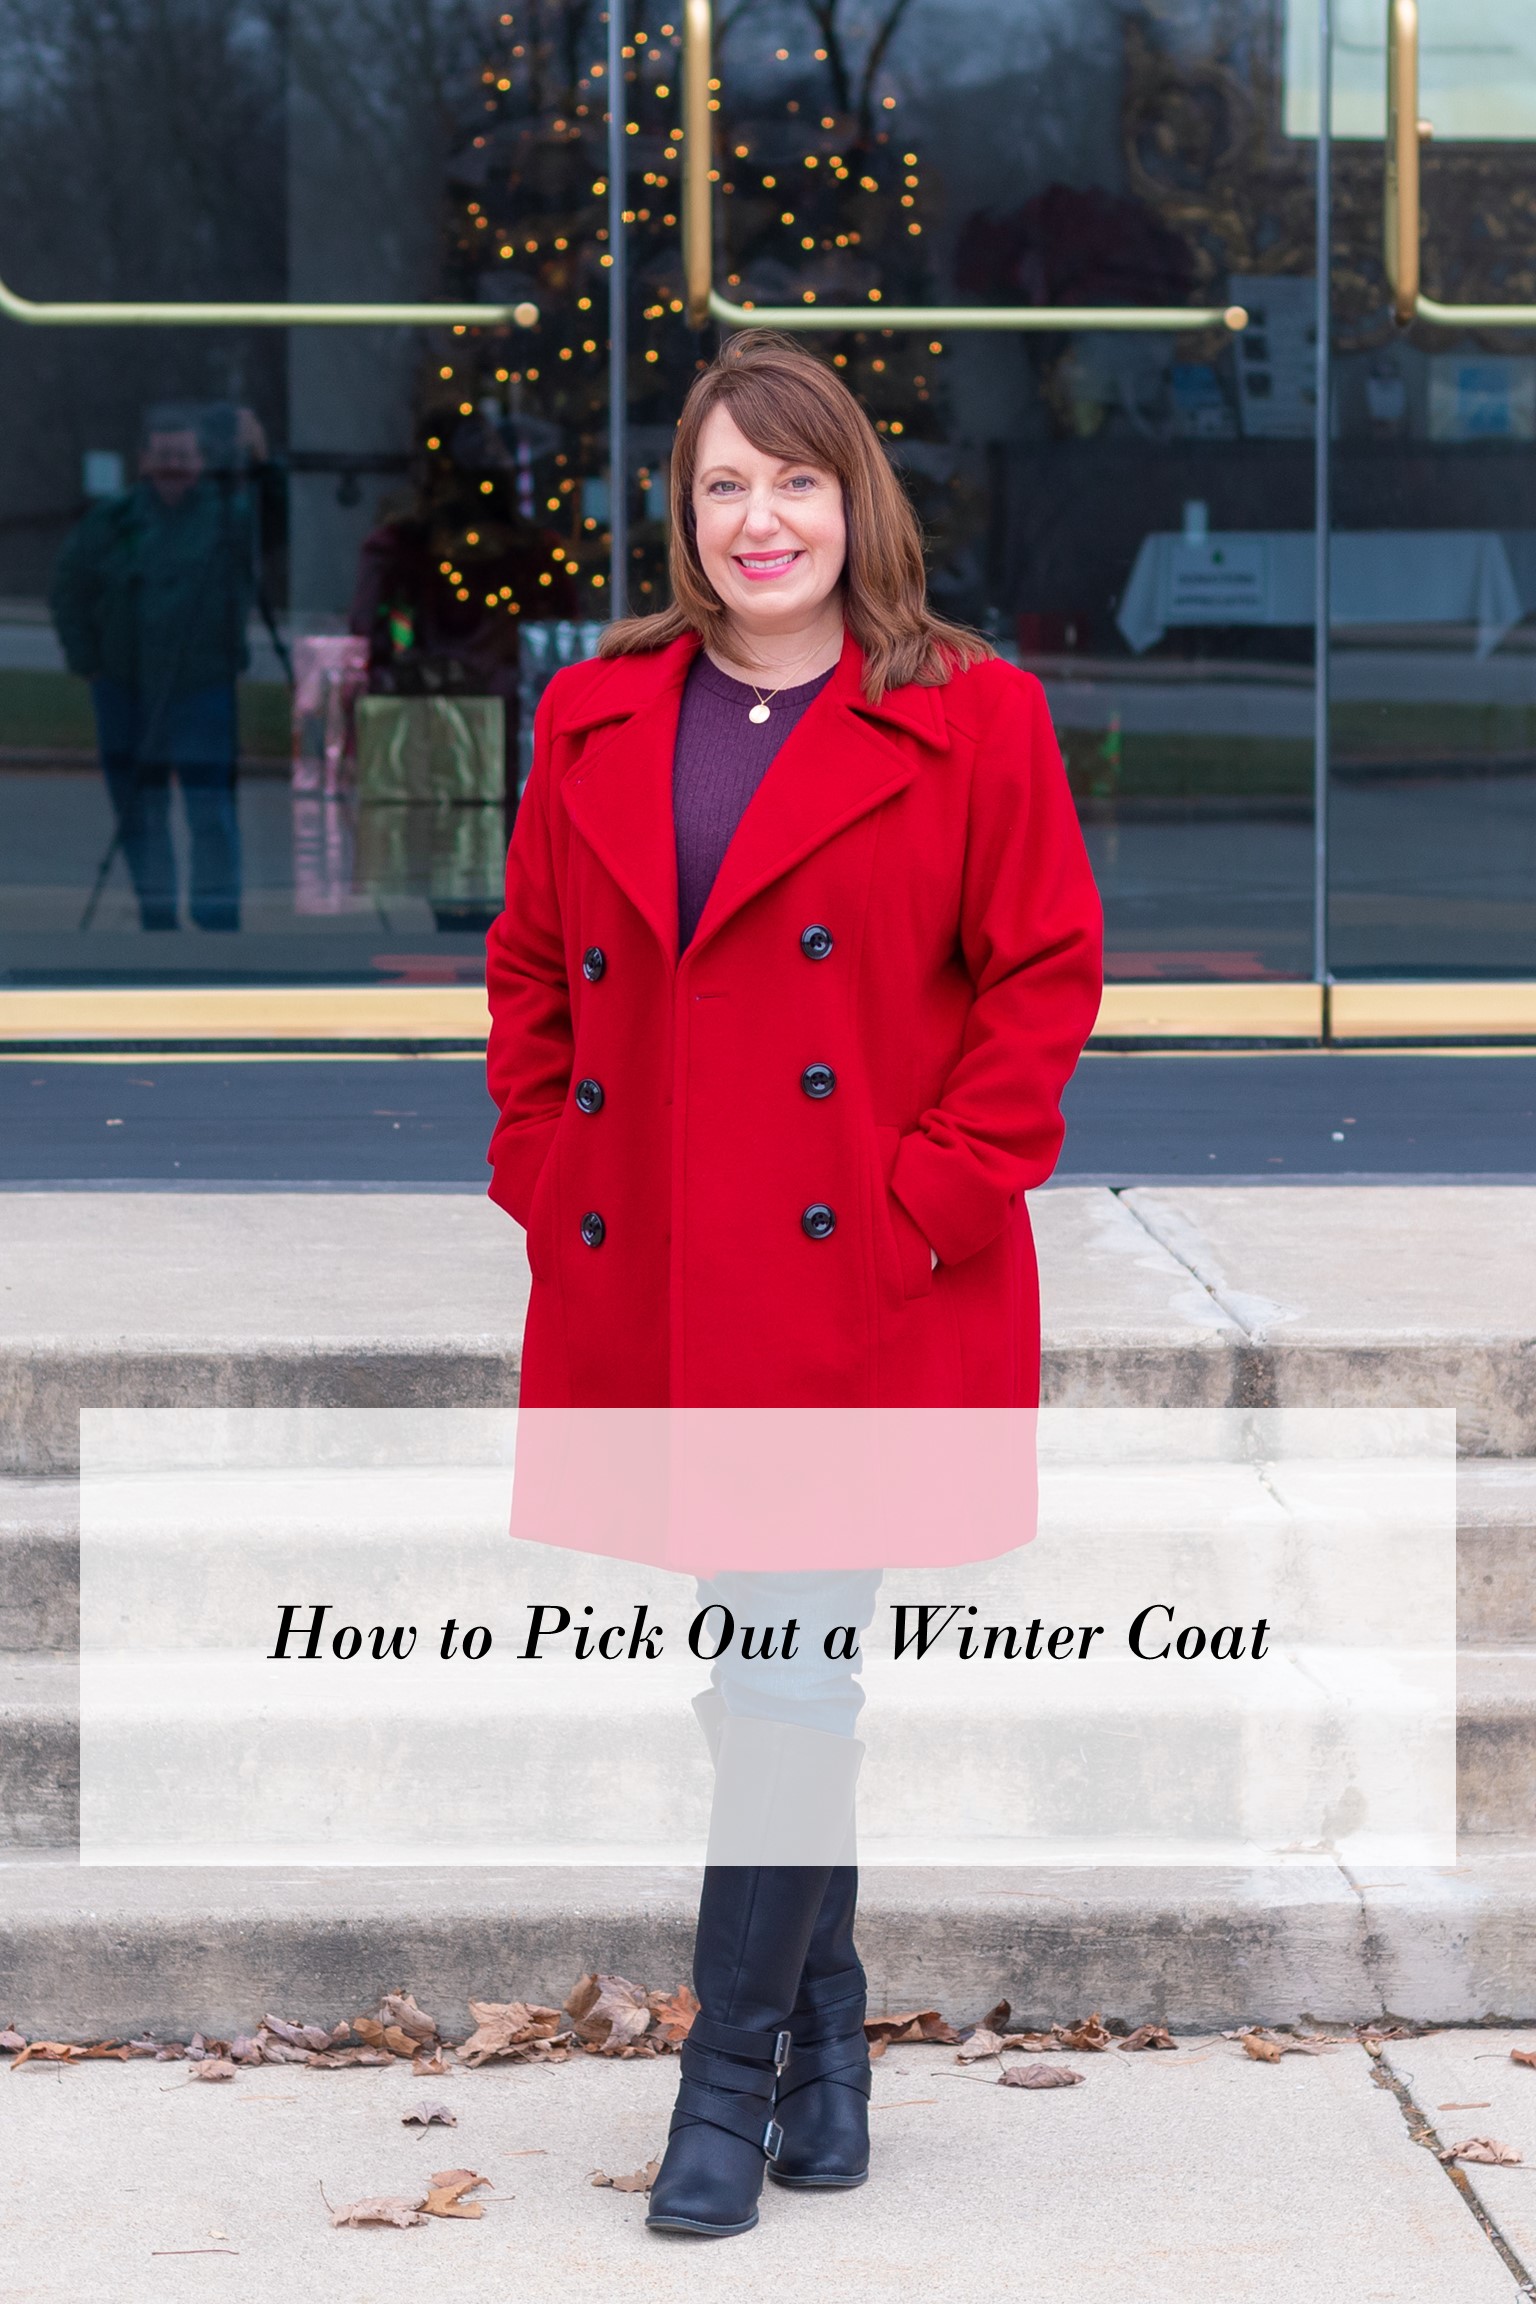 How to Pick Out a Winter Coat